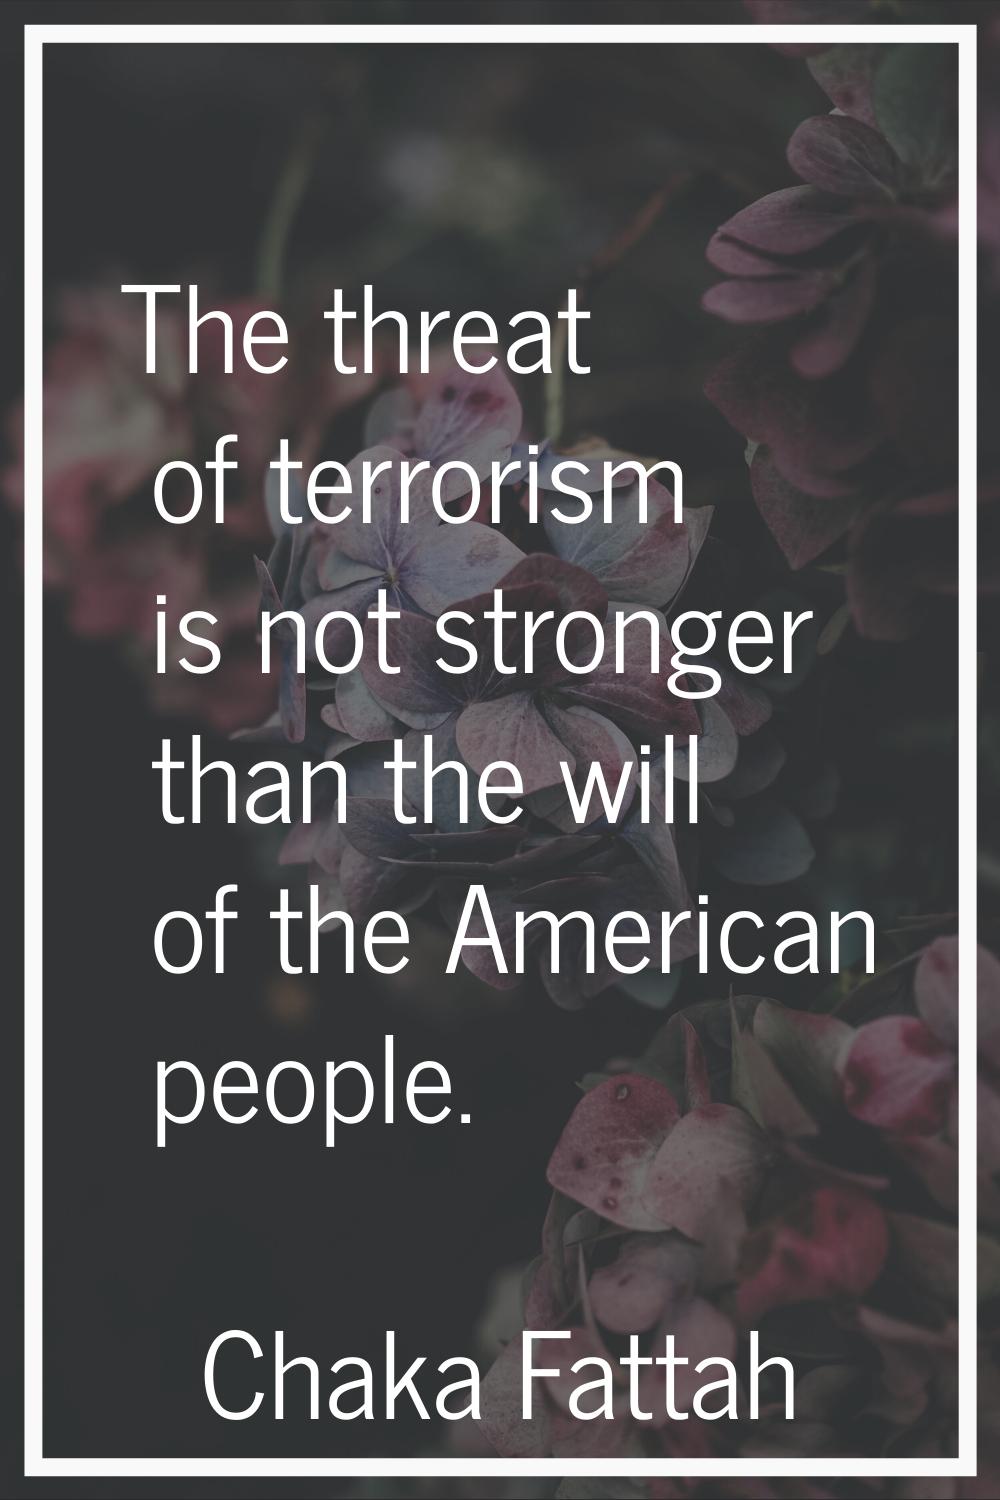 The threat of terrorism is not stronger than the will of the American people.